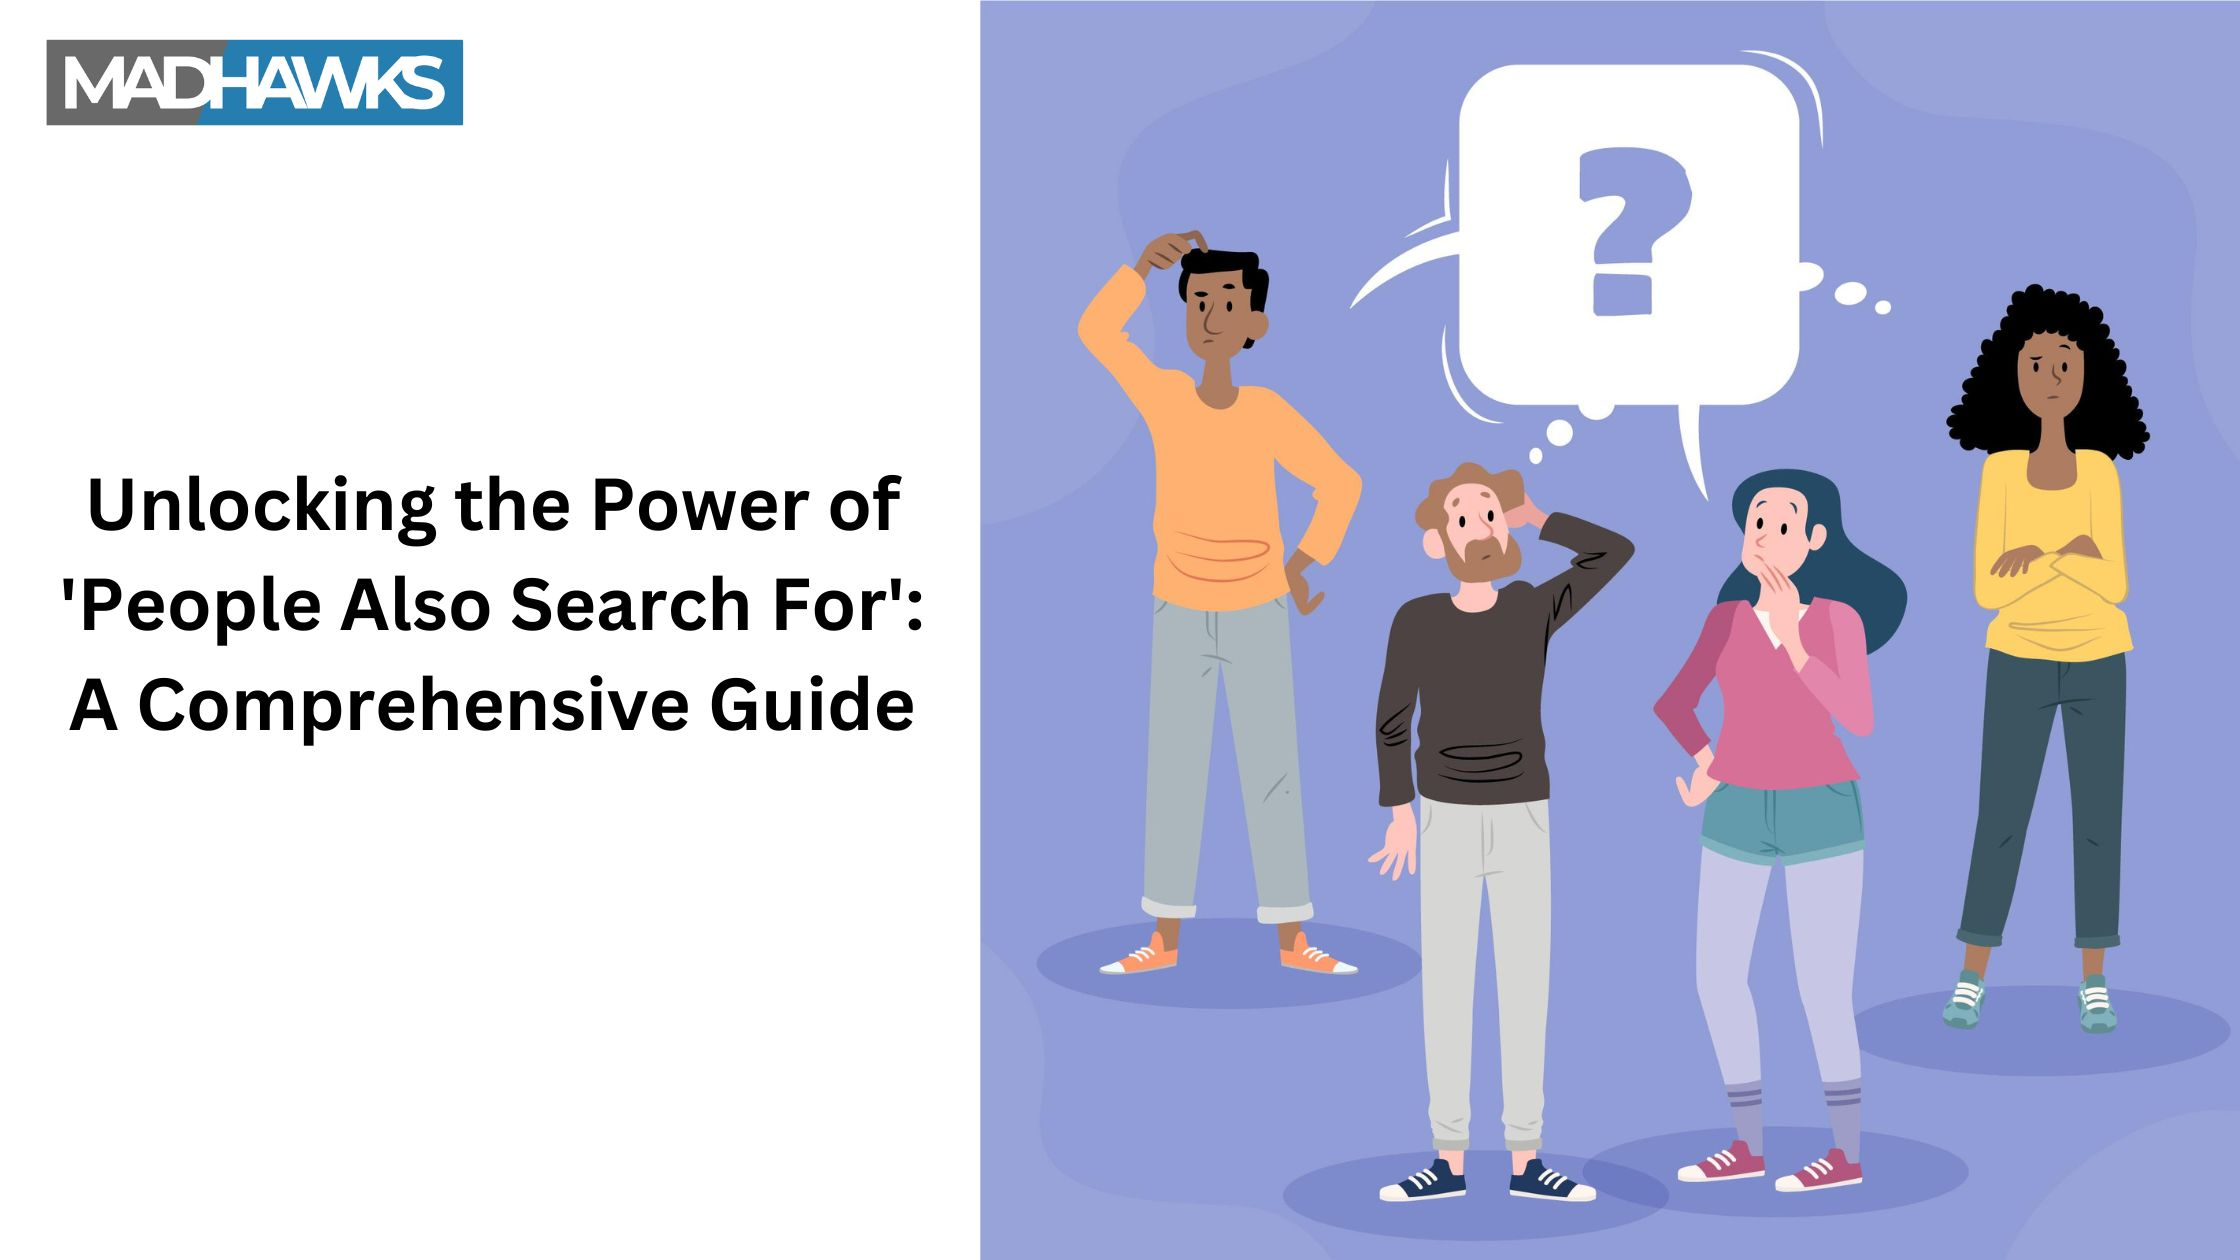 Unlocking the Power of People Also Search For: A Comprehensive Guide